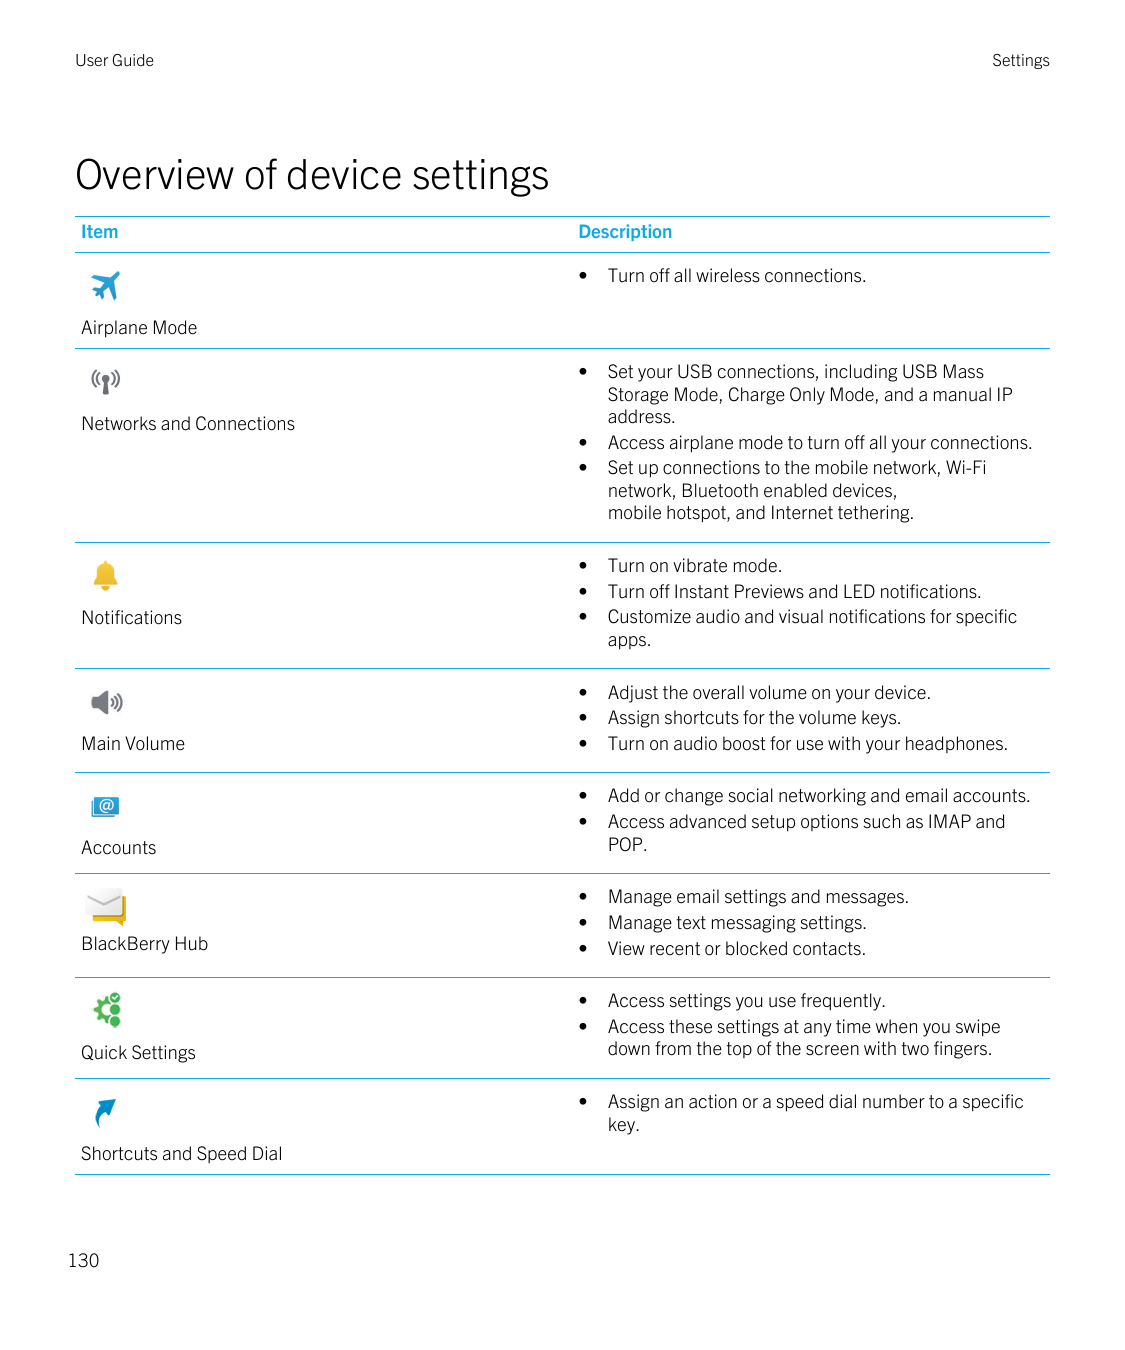 User GuideSettingsOverview of device settingsItemDescription•Turn off all wireless connections.•Set your USB connections, includ